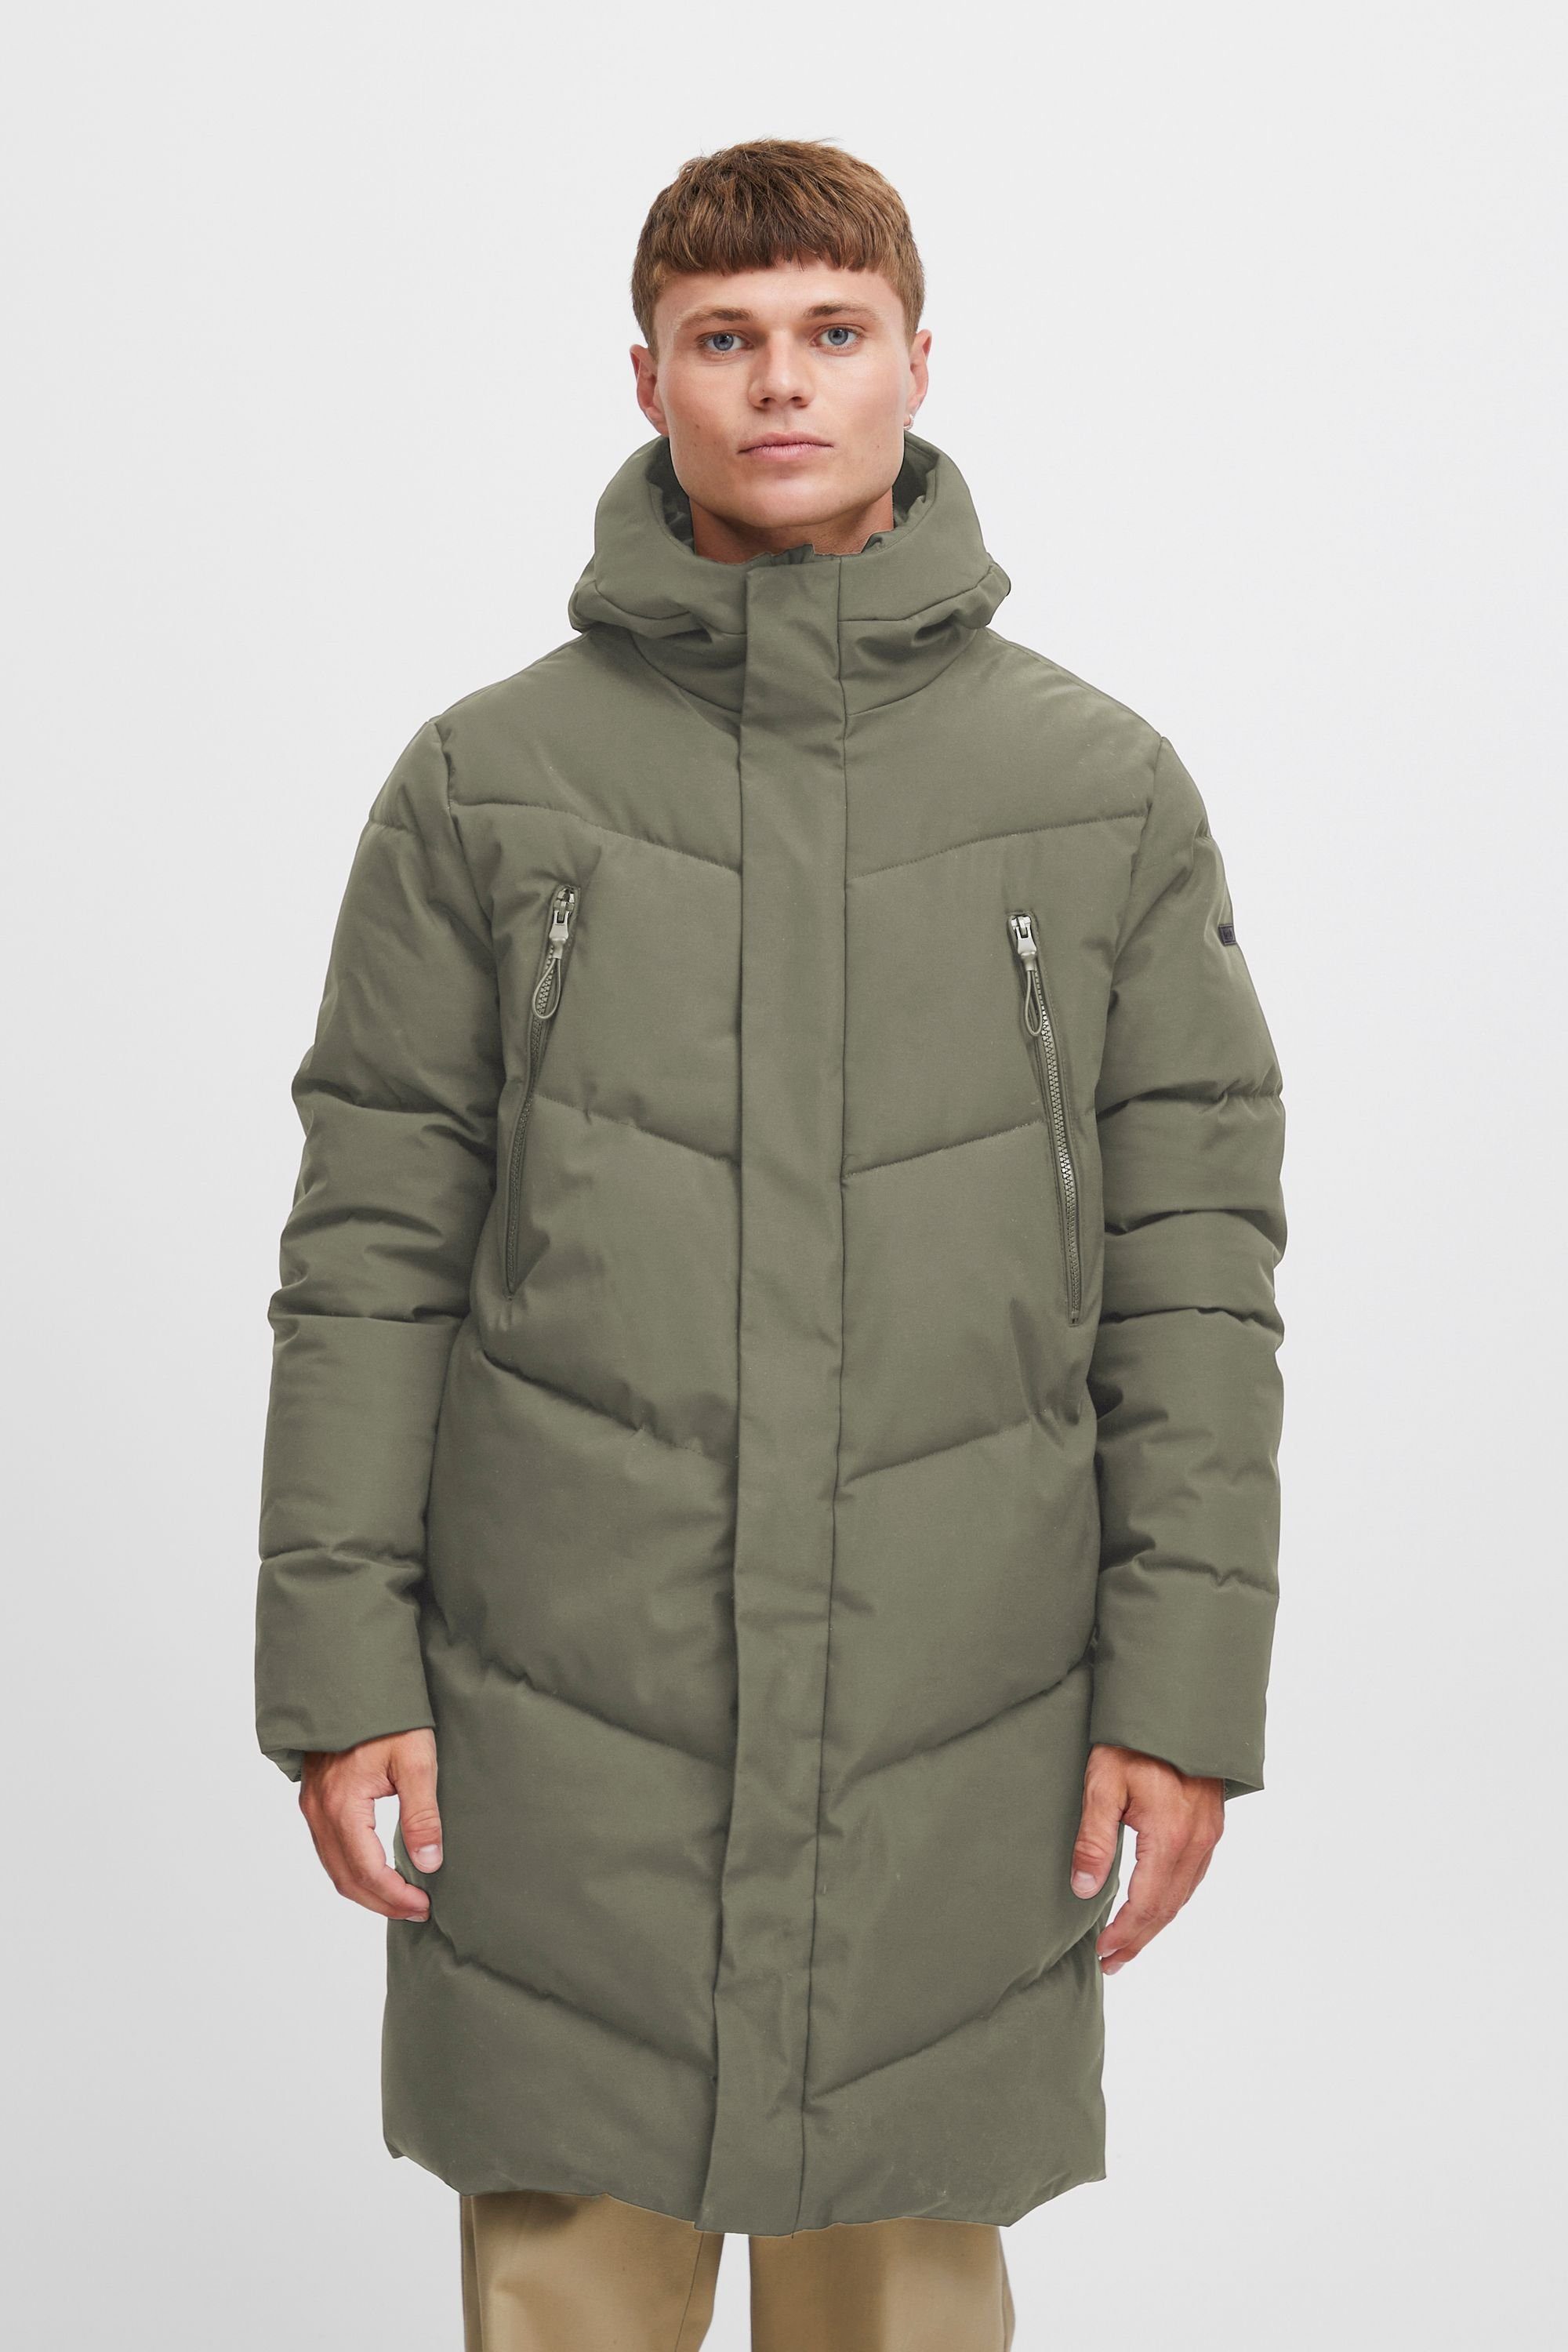 Solid Steppjacke SDGabe Long Dusty Olive (180515)